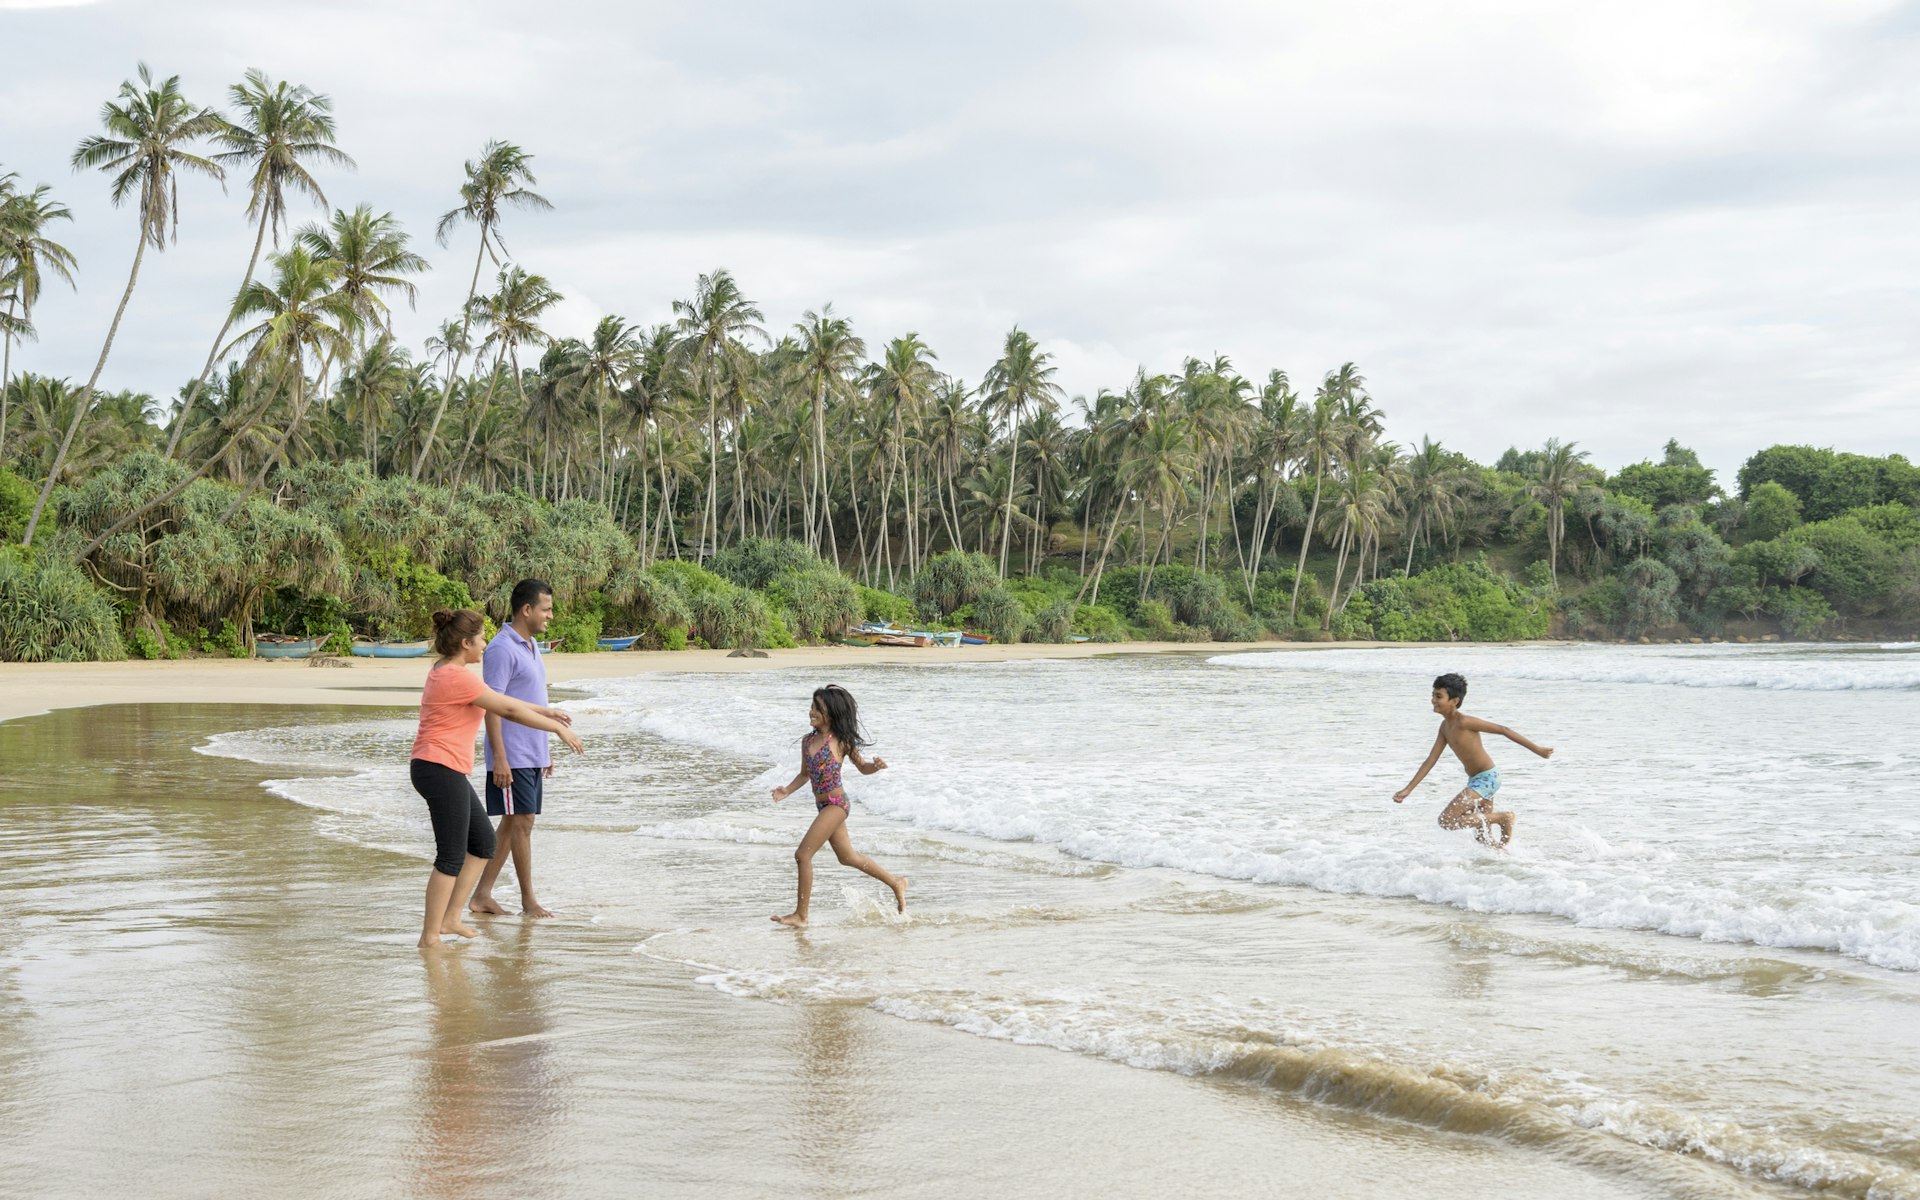 Two young children run out of the sea towards their parents on a sandy beach backed by palm trees